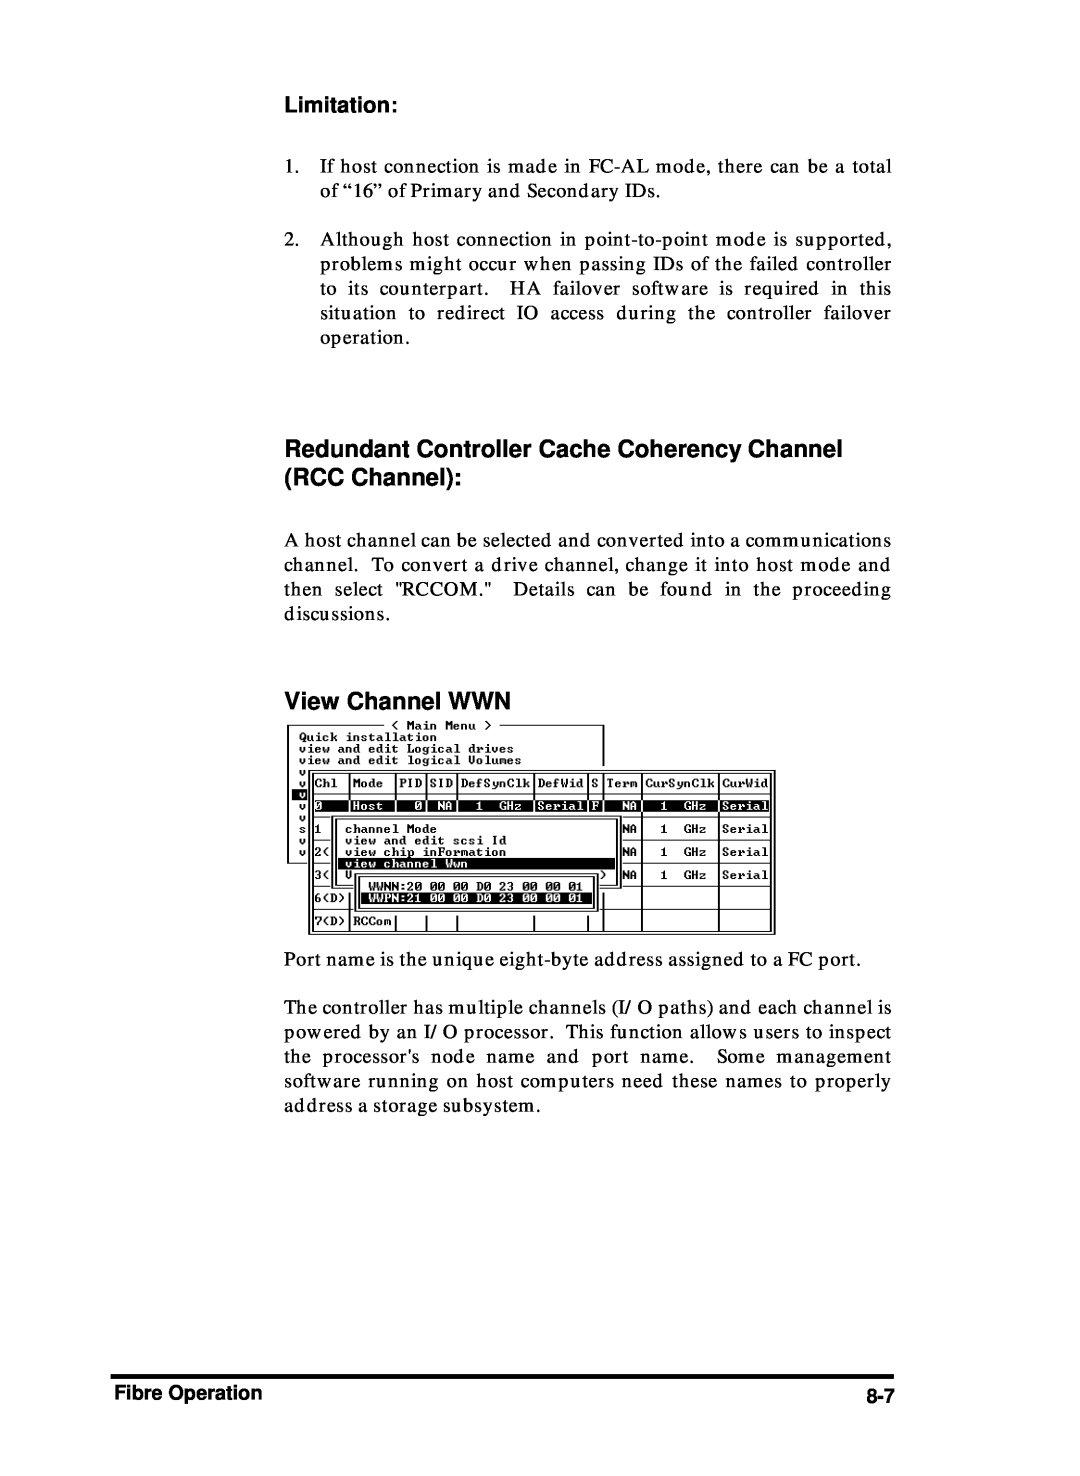 Compaq Infortrend manual Redundant Controller Cache Coherency Channel RCC Channel, View Channel WWN, Limitation 